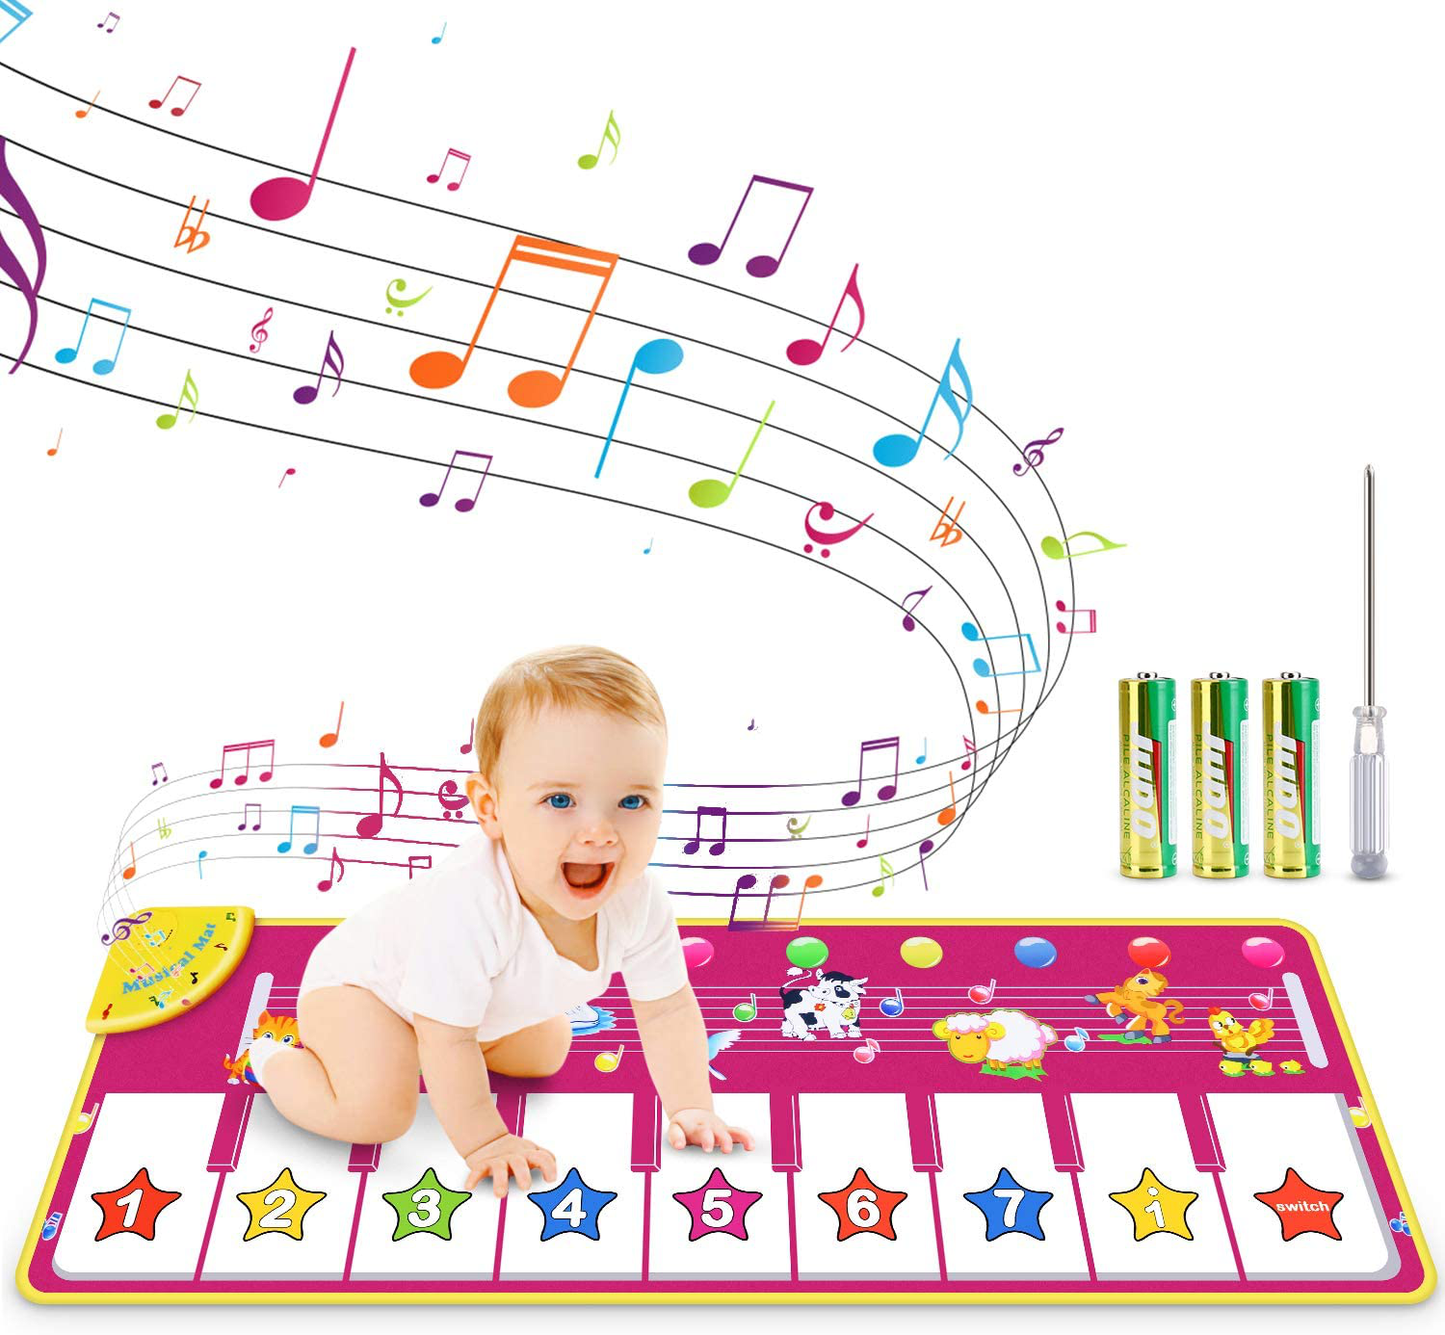 RenFox Kids Musical Keyboard Piano Mat, Electronic Music Play Blanket Dance Mat with 8 Different Animal Sound for Early Learning Education Toys Gift for Toddler Baby Boys Girls (Batteries Included)